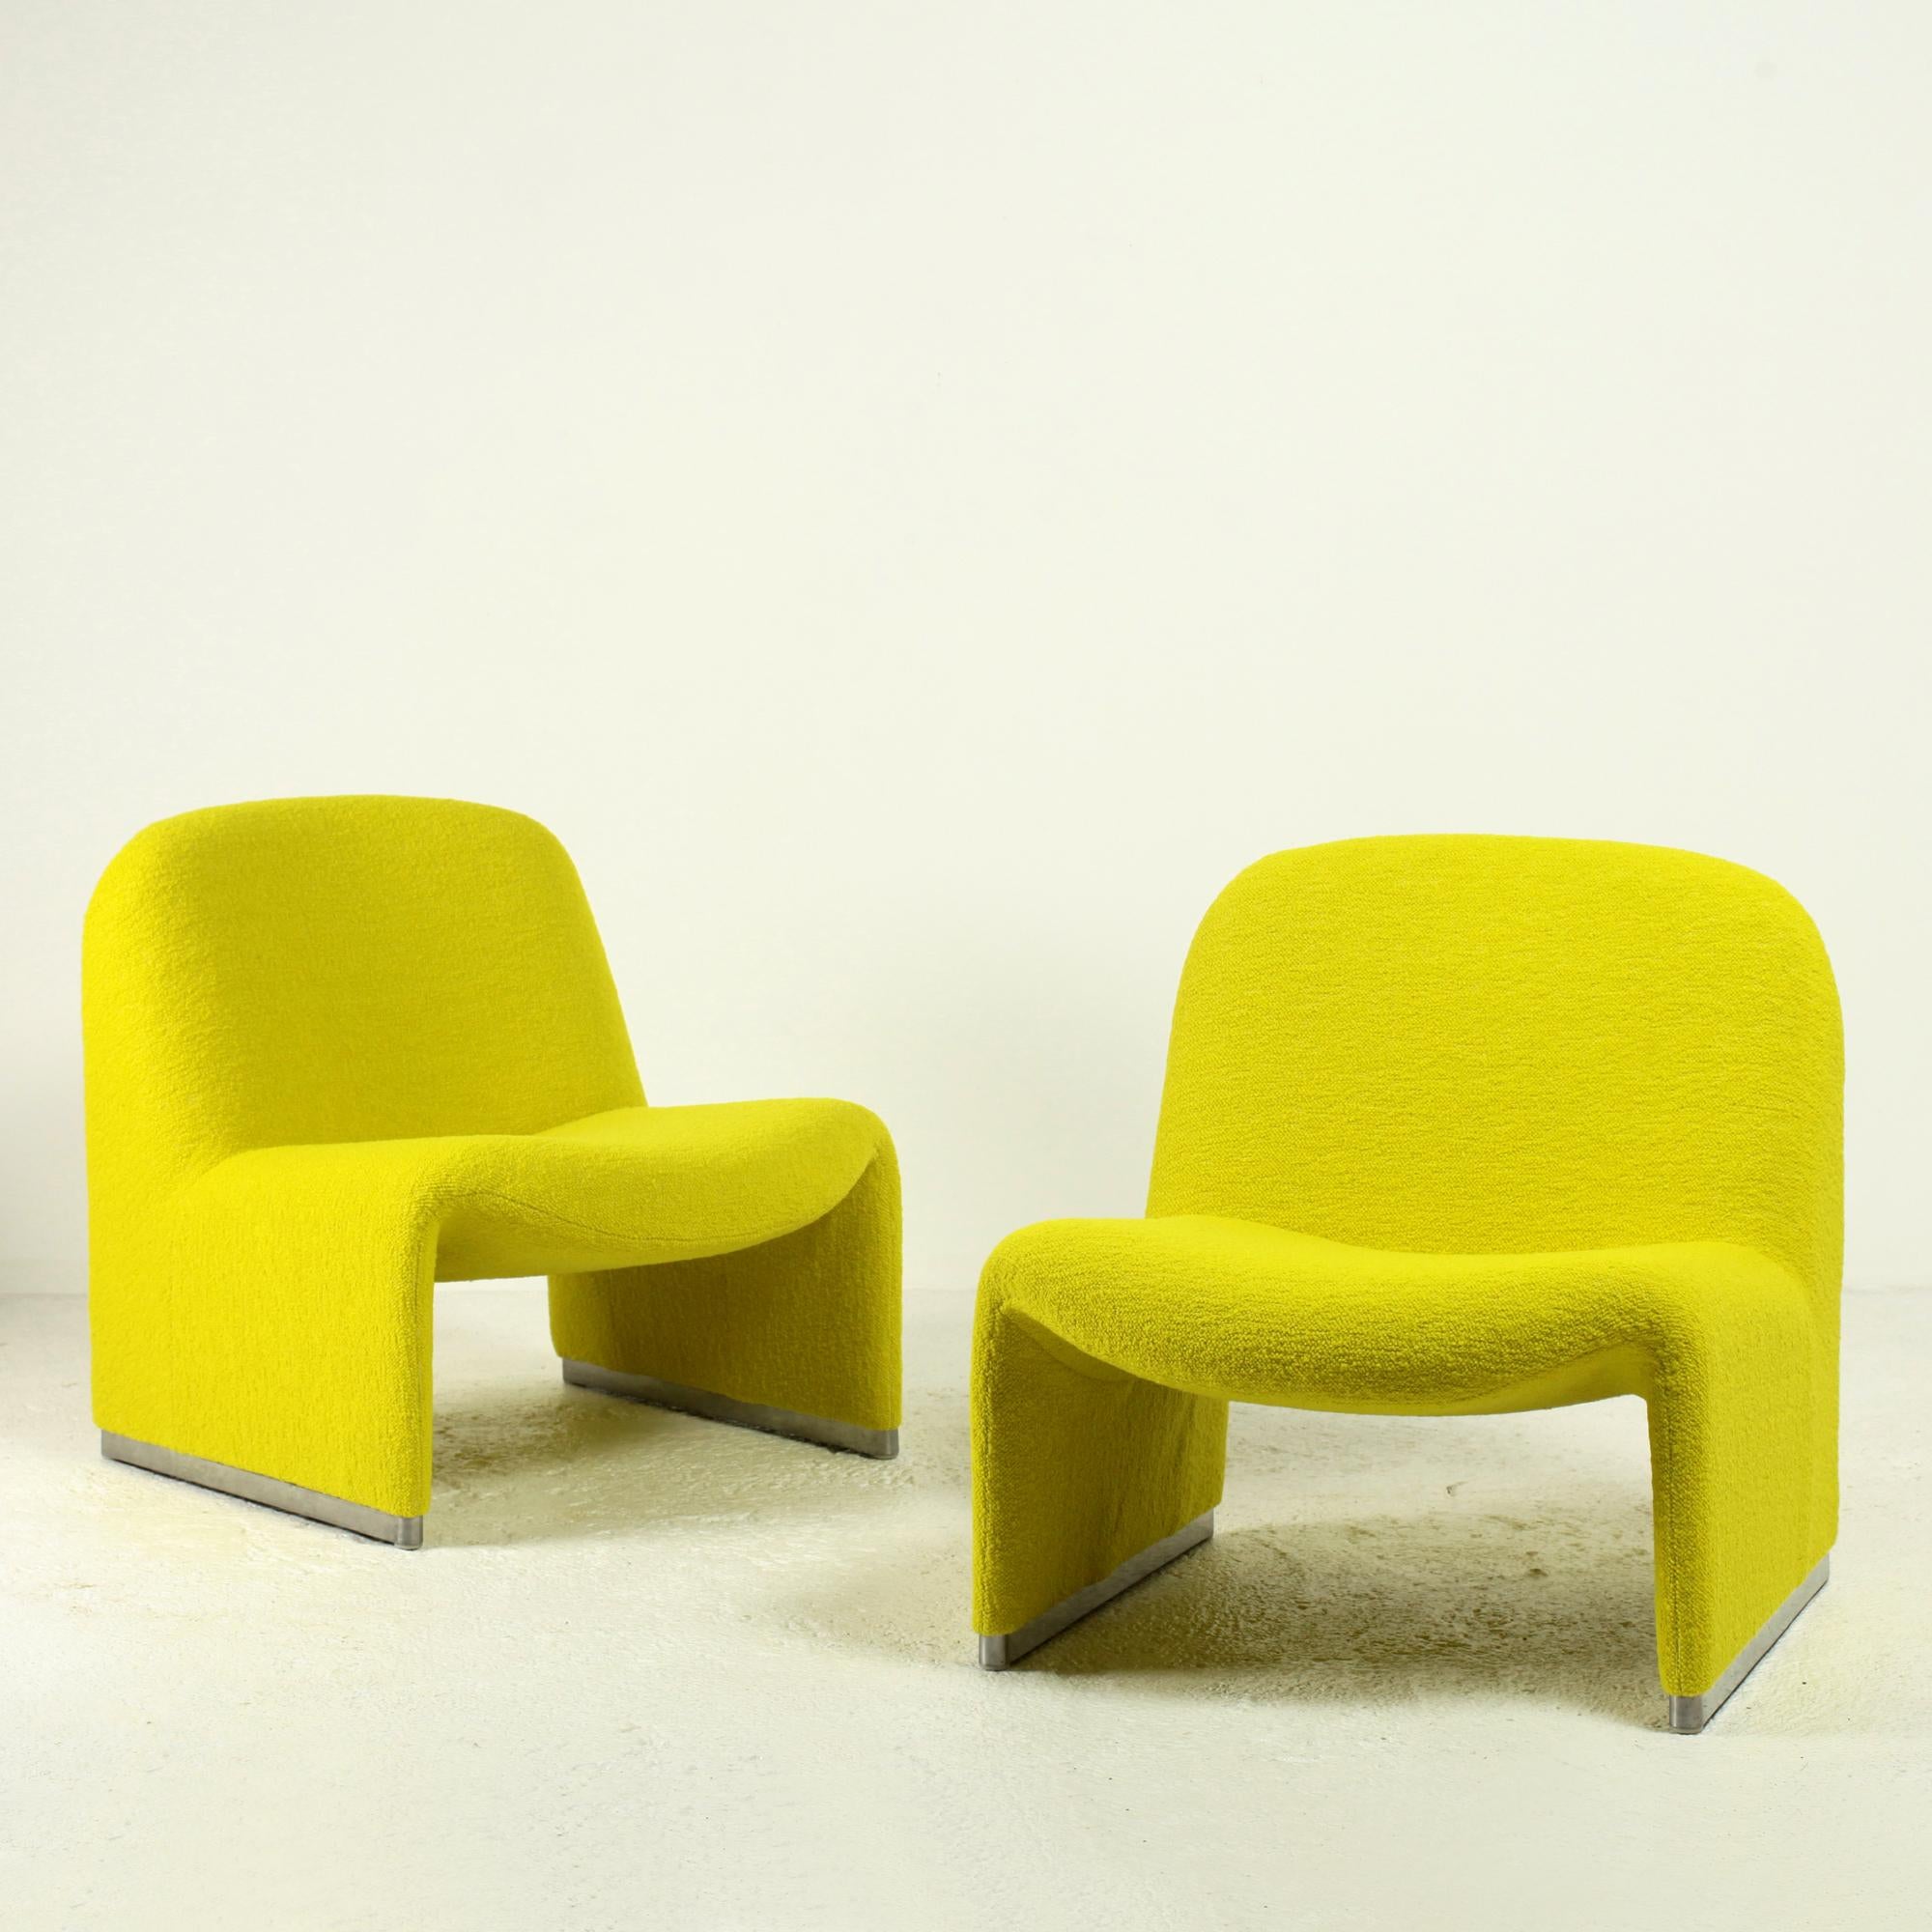 Pair of iconic 'Alky' lounge chair newly reupholstered in italian yellow bouclé
Designed by Giancarlo Piretti for Anonima Castelli in the late 60s.
These lounges are known for their comfortable seating and iconic Italian design with nice clear line.